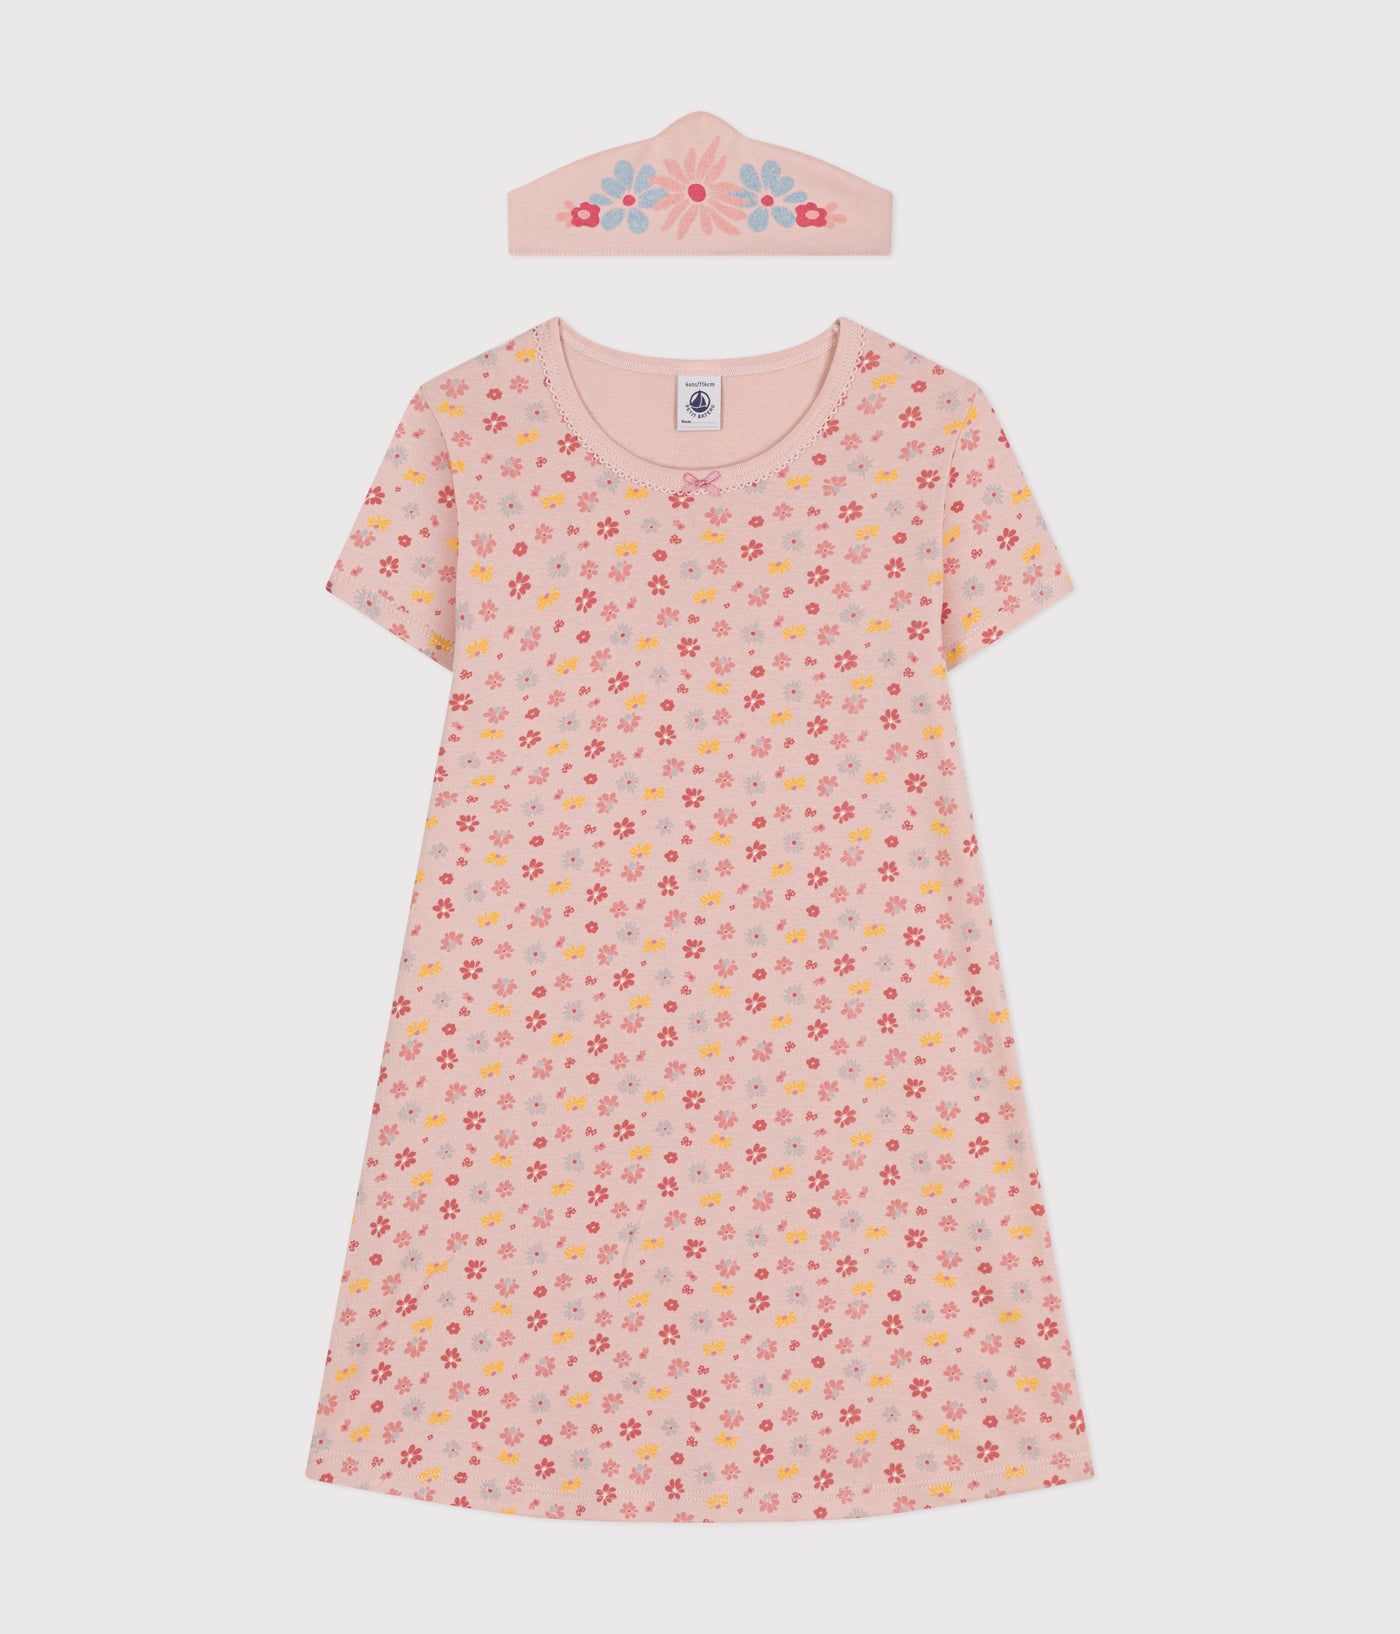 CHILDREN'S COTTON FLORAL PATTERNED NIGHTDRESS AND DIADEM